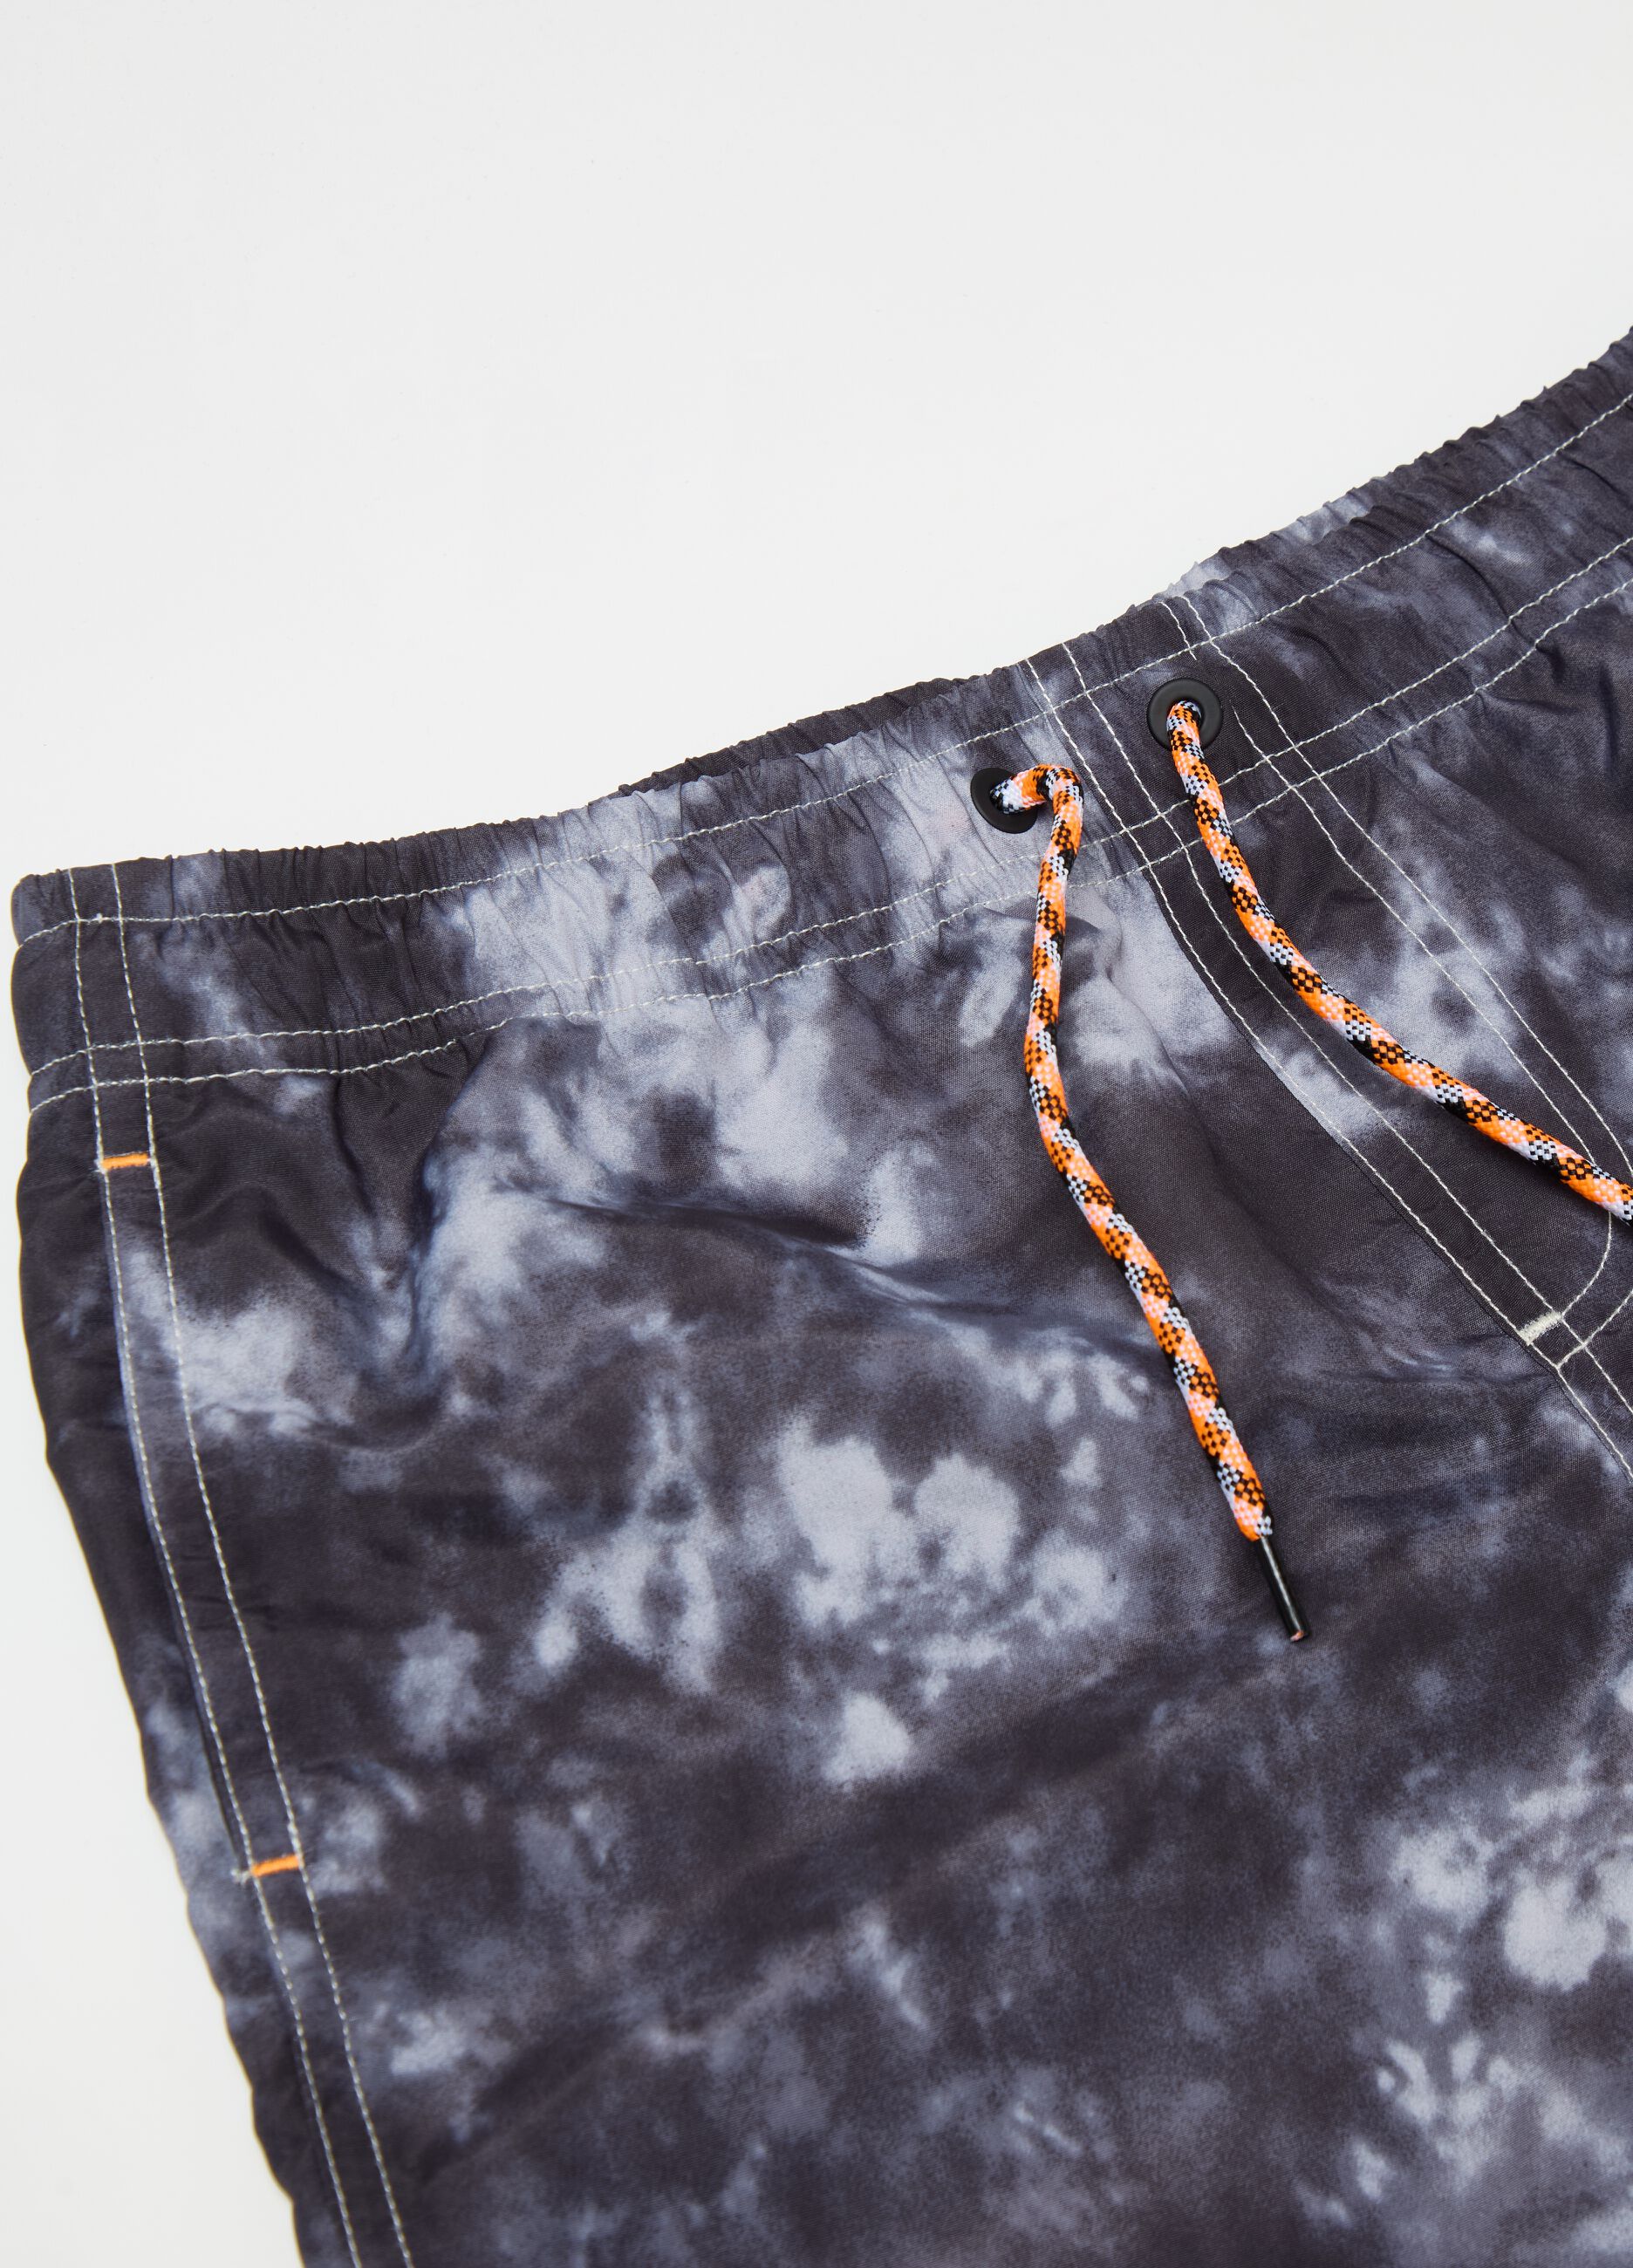 Tie-dye swimming trunks with drawstring